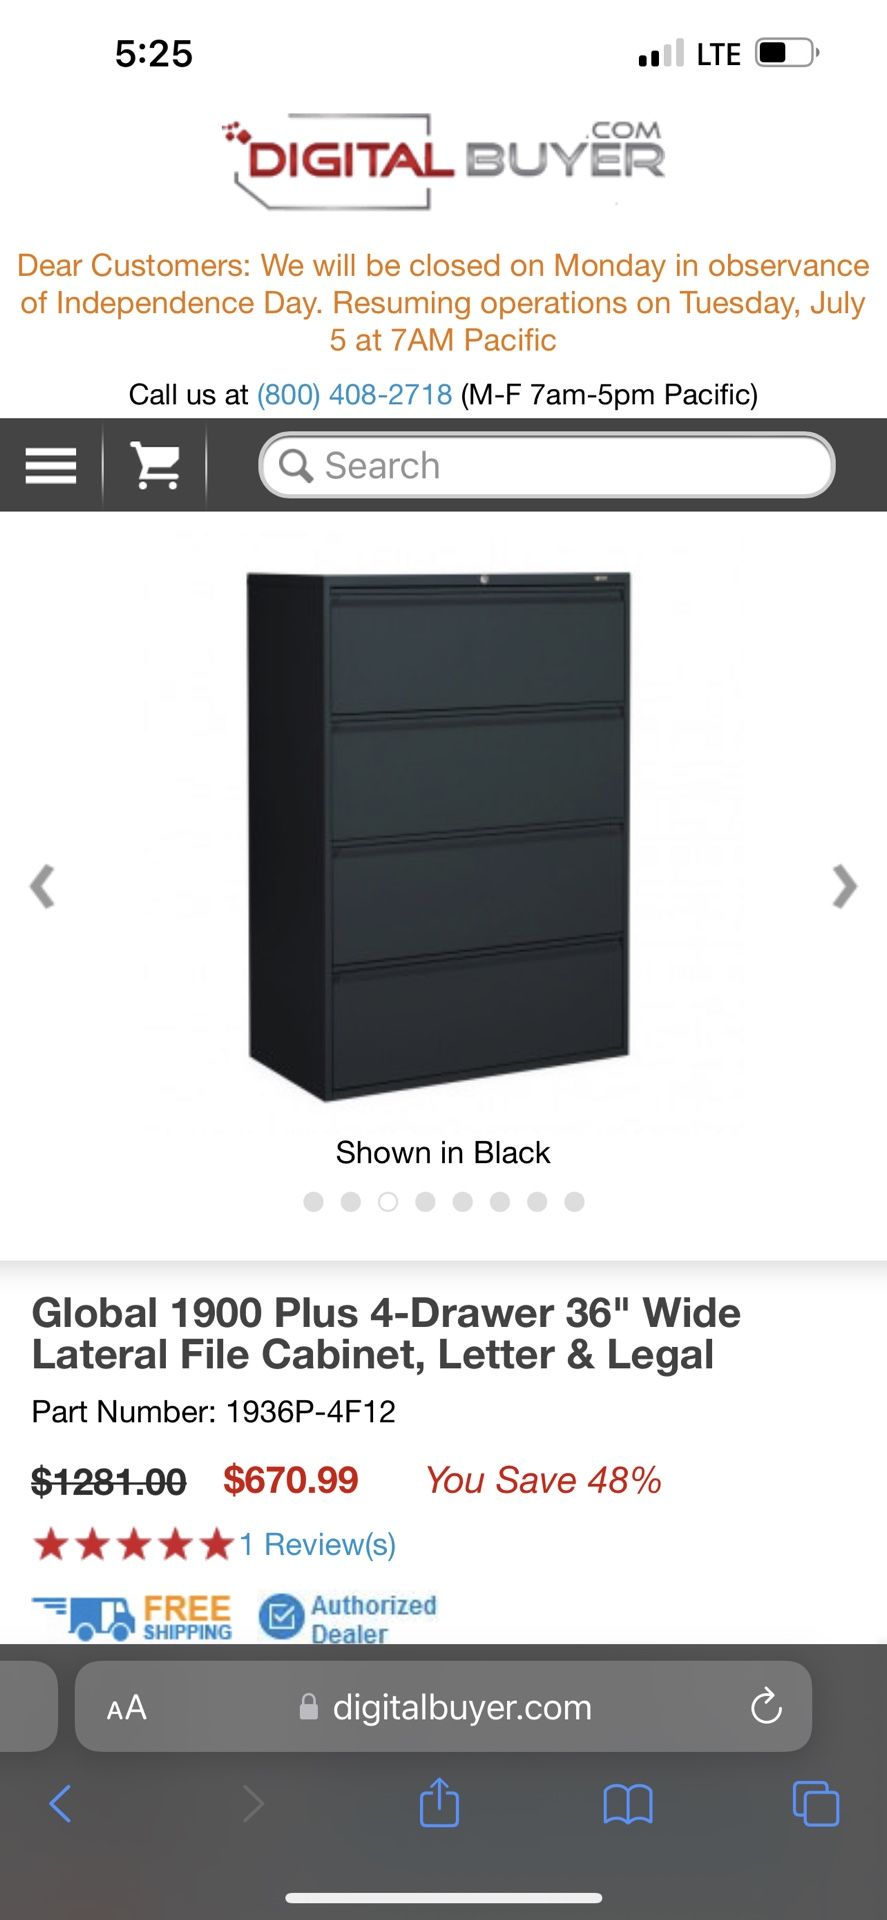  Global 1900 Plus 4-Drawer 36" Wide Lateral File Cabinet, Letter & Legal